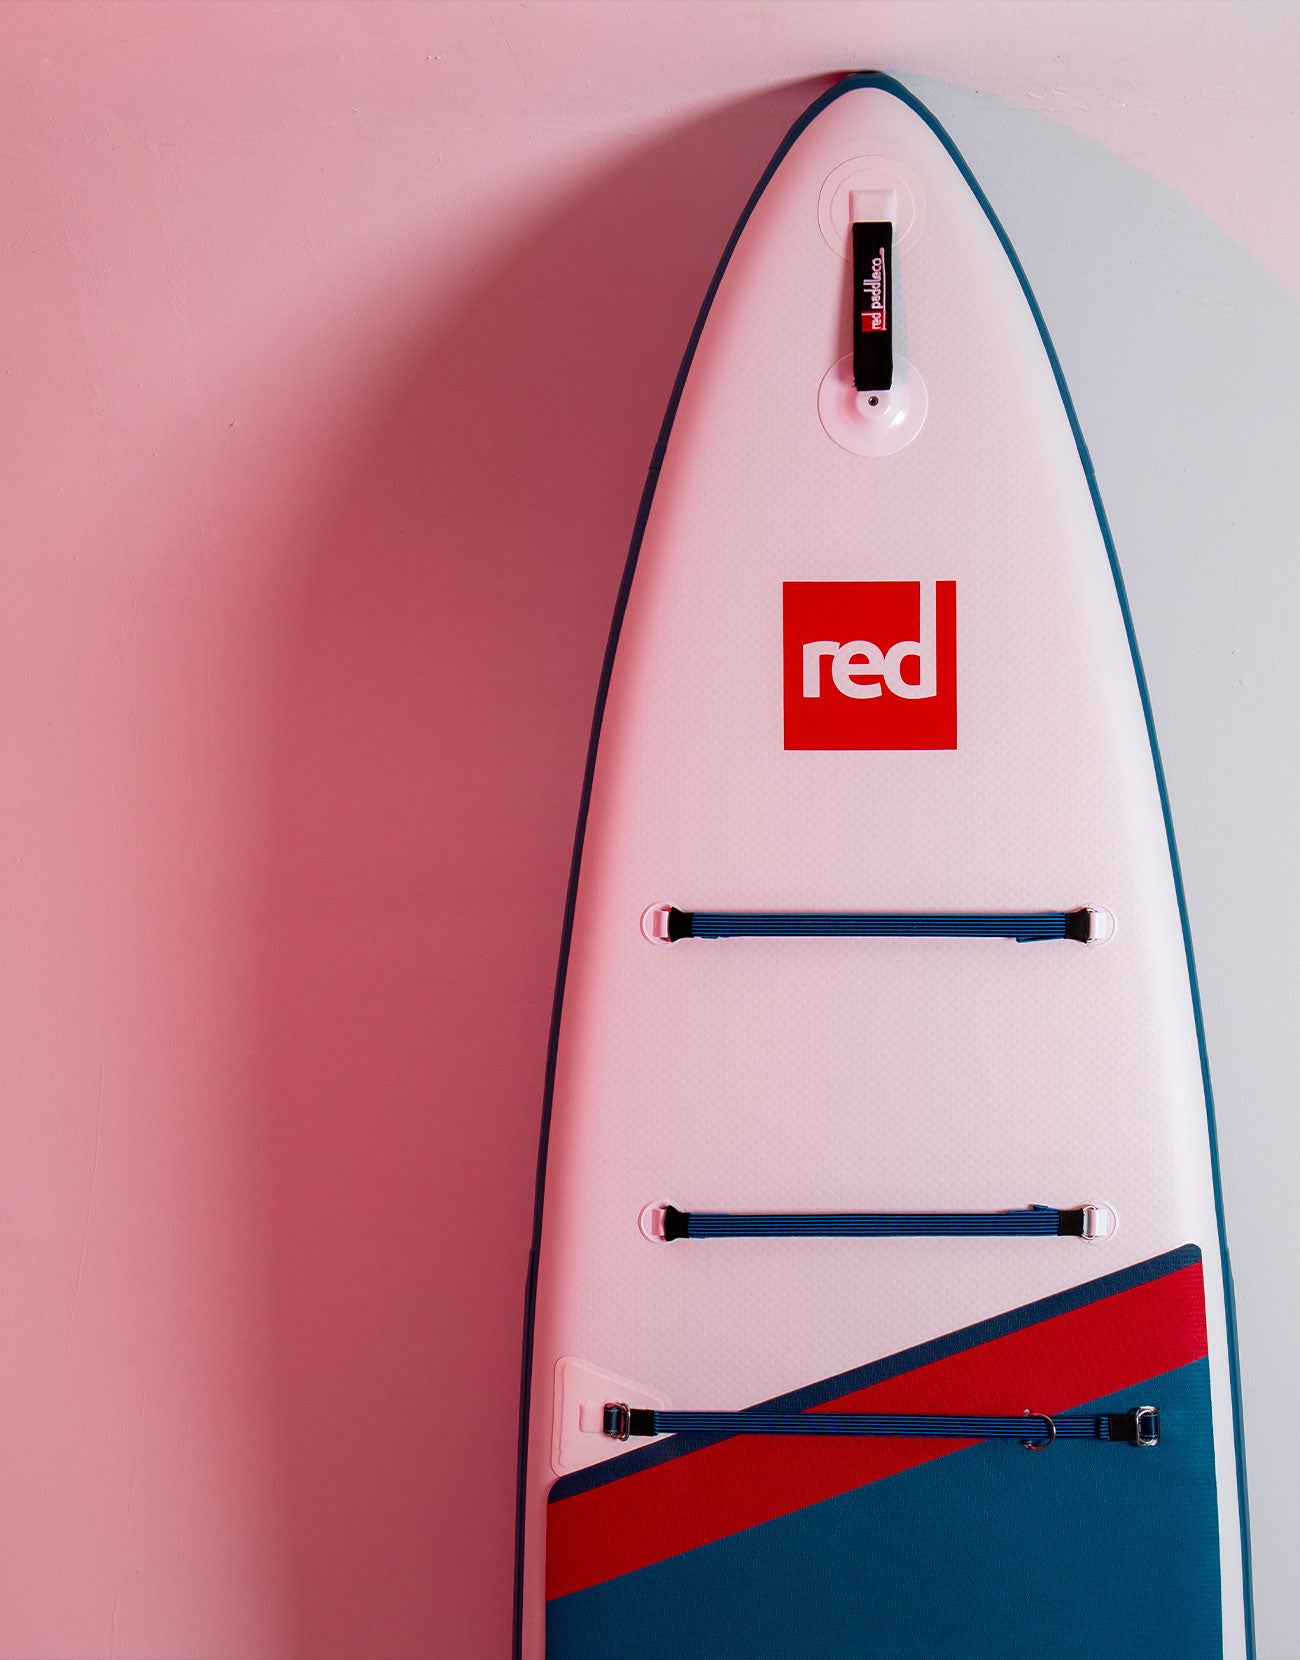 Copenhagen Surf Shop 2021 Red Paddle Co 11'0" SPORT TOURING MSL Oppustelig Stand Up Paddle SUP iSUP Board , Taske, Titan 2 Pumpe, Carbon 50 Nylon Paddle & Leash